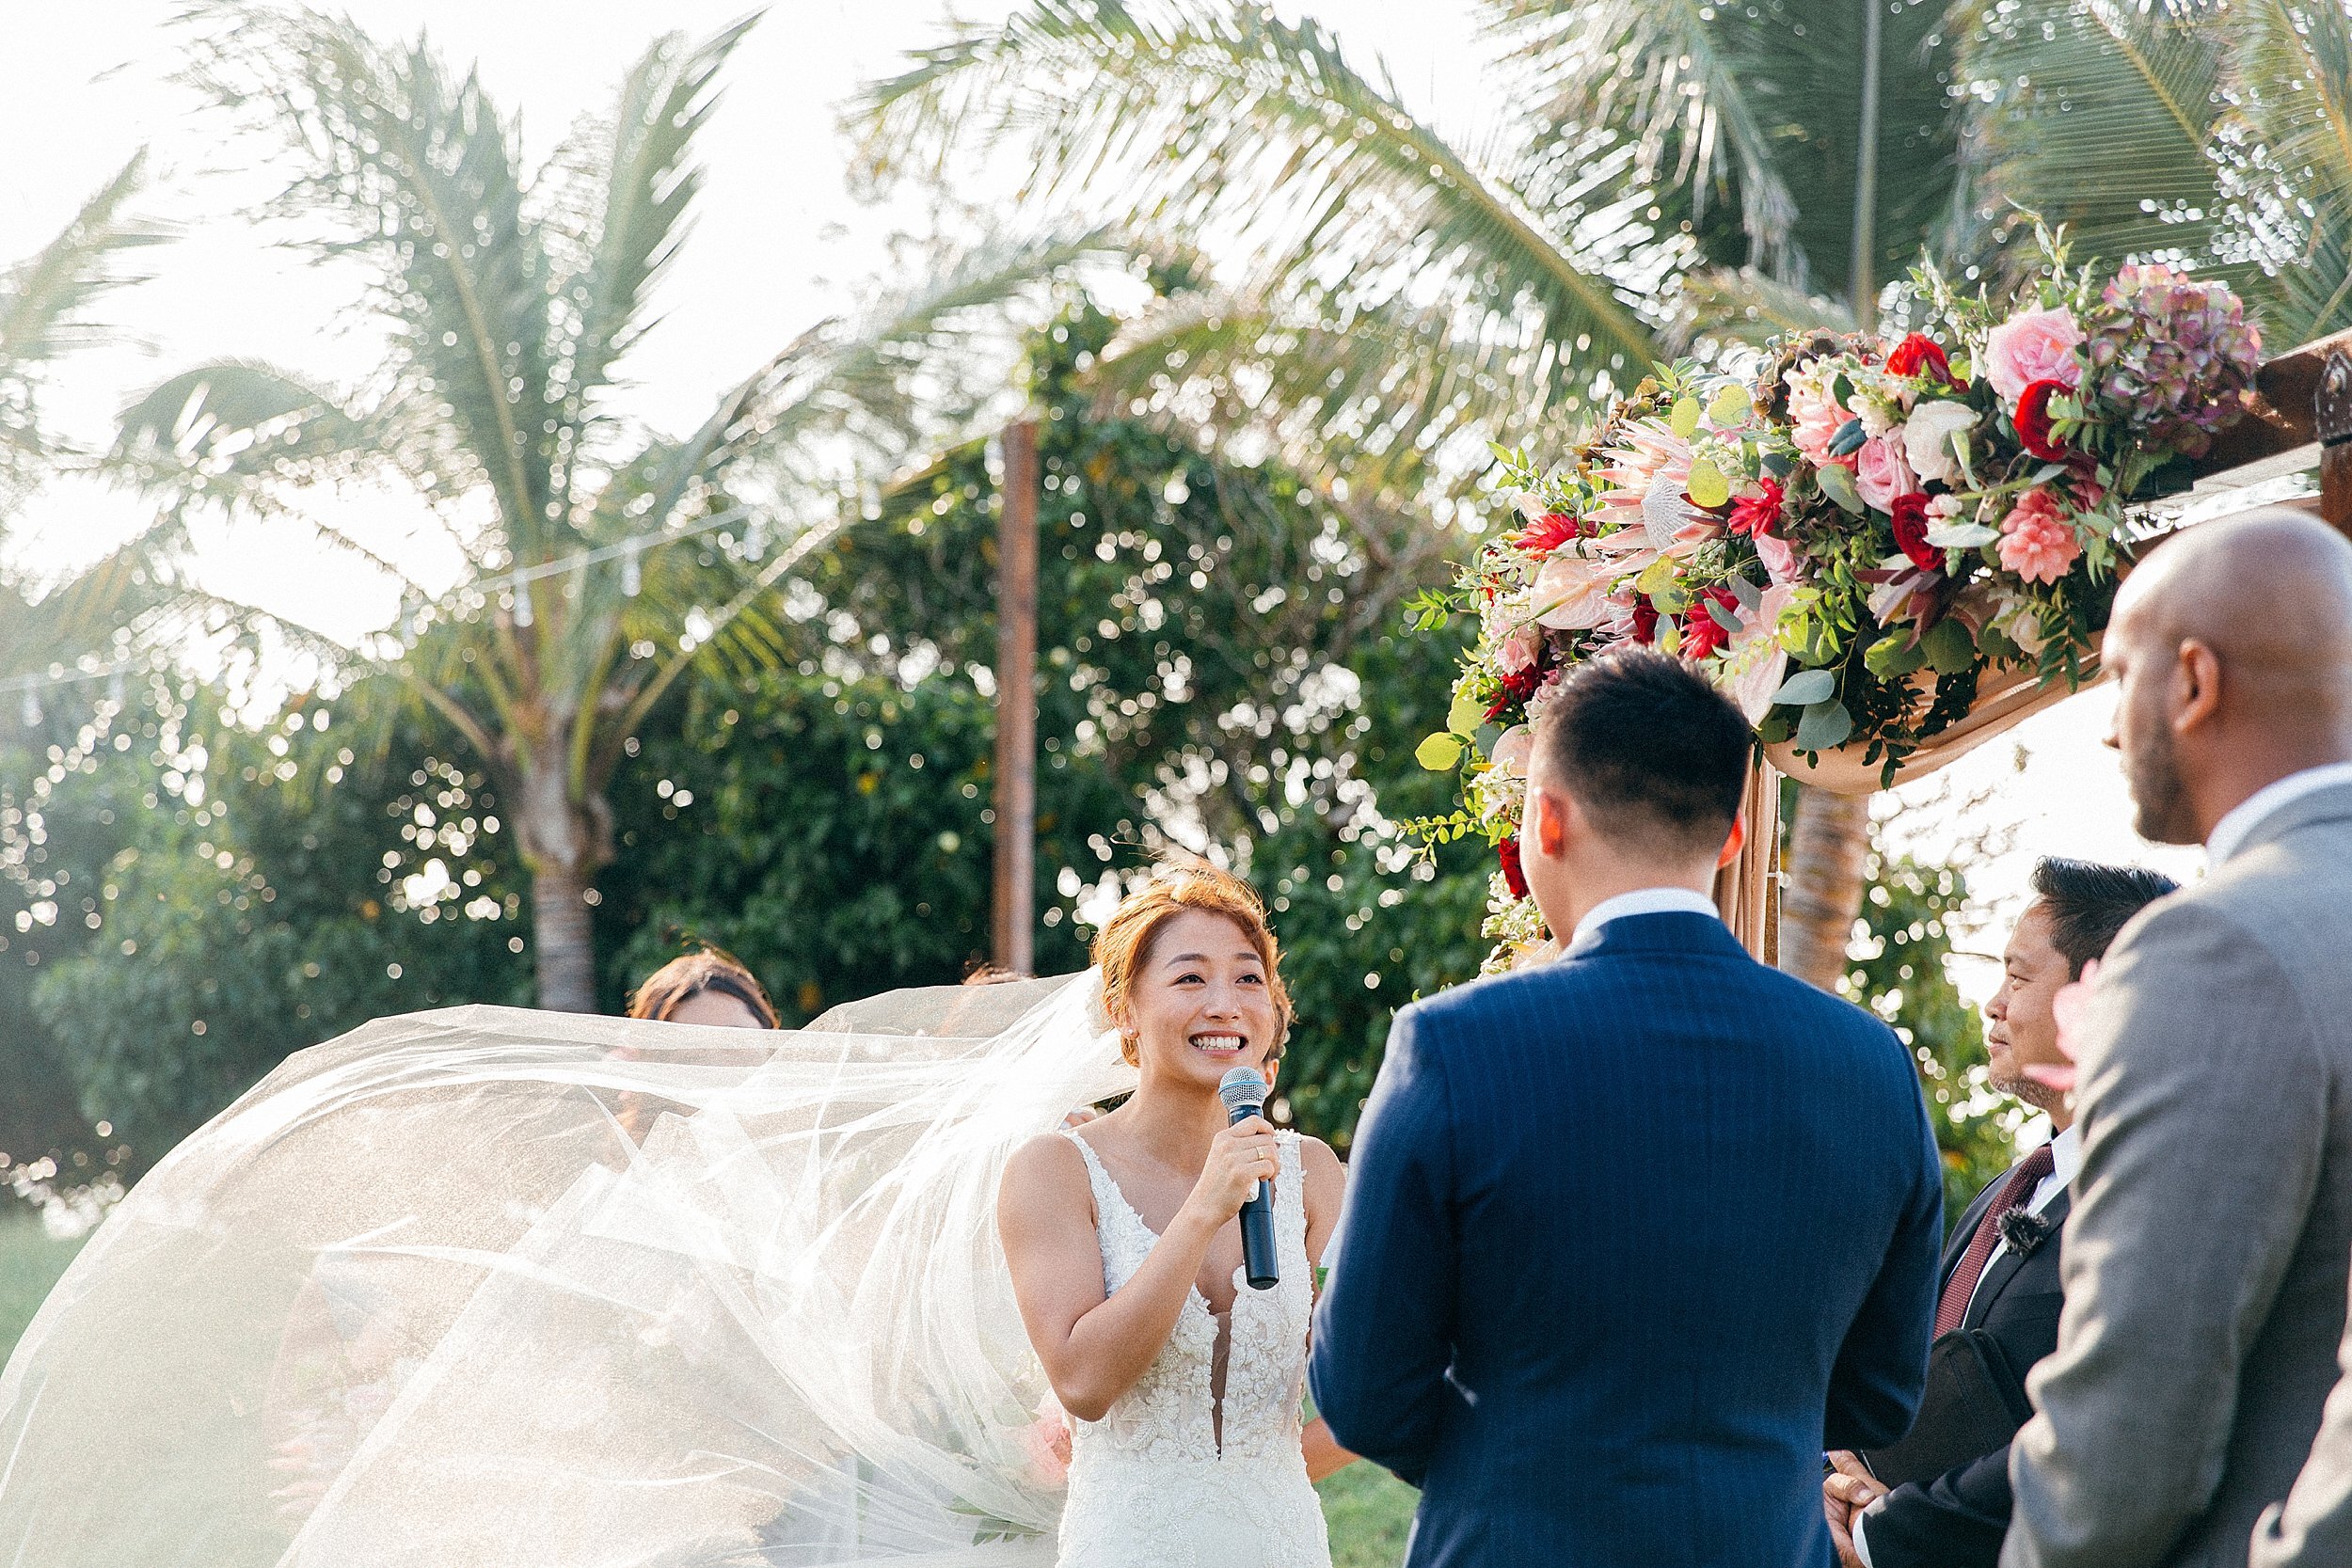  Loulu Palm Estate Oceanfront and Beach Chinese Wedding in Hawaii 